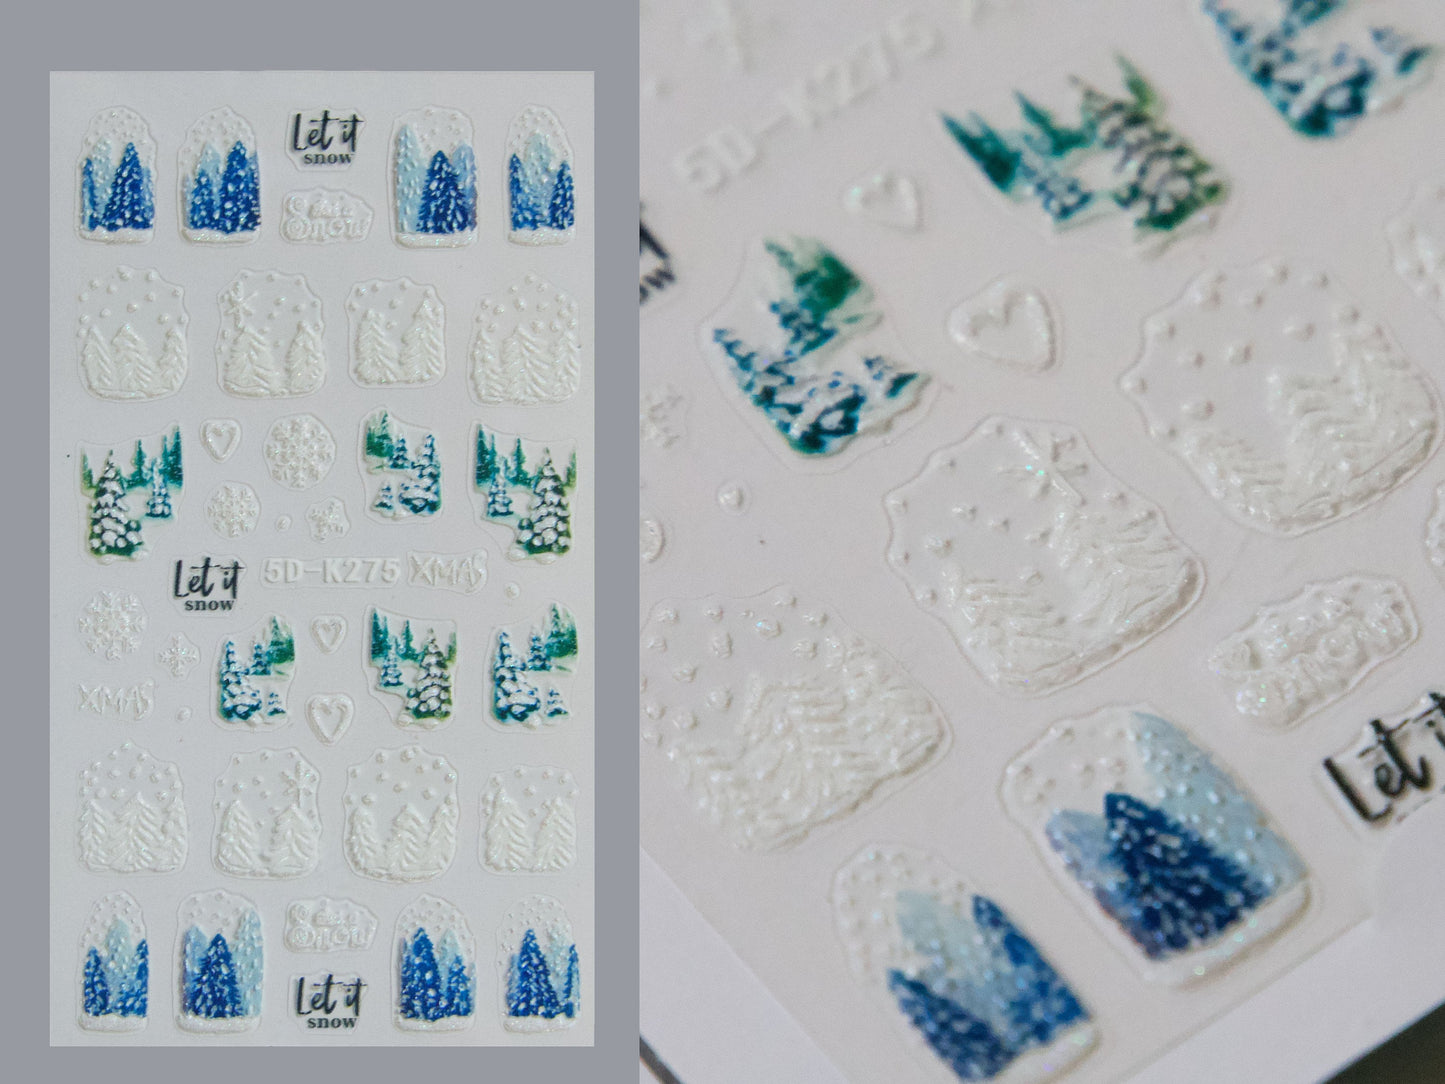 Shiny Glittery Winter Holiday Nail Art Stickers Decals/ Christmas 3D Textured Snow-Covered Cottages Sticker/ Wonderland New Year nail Decals